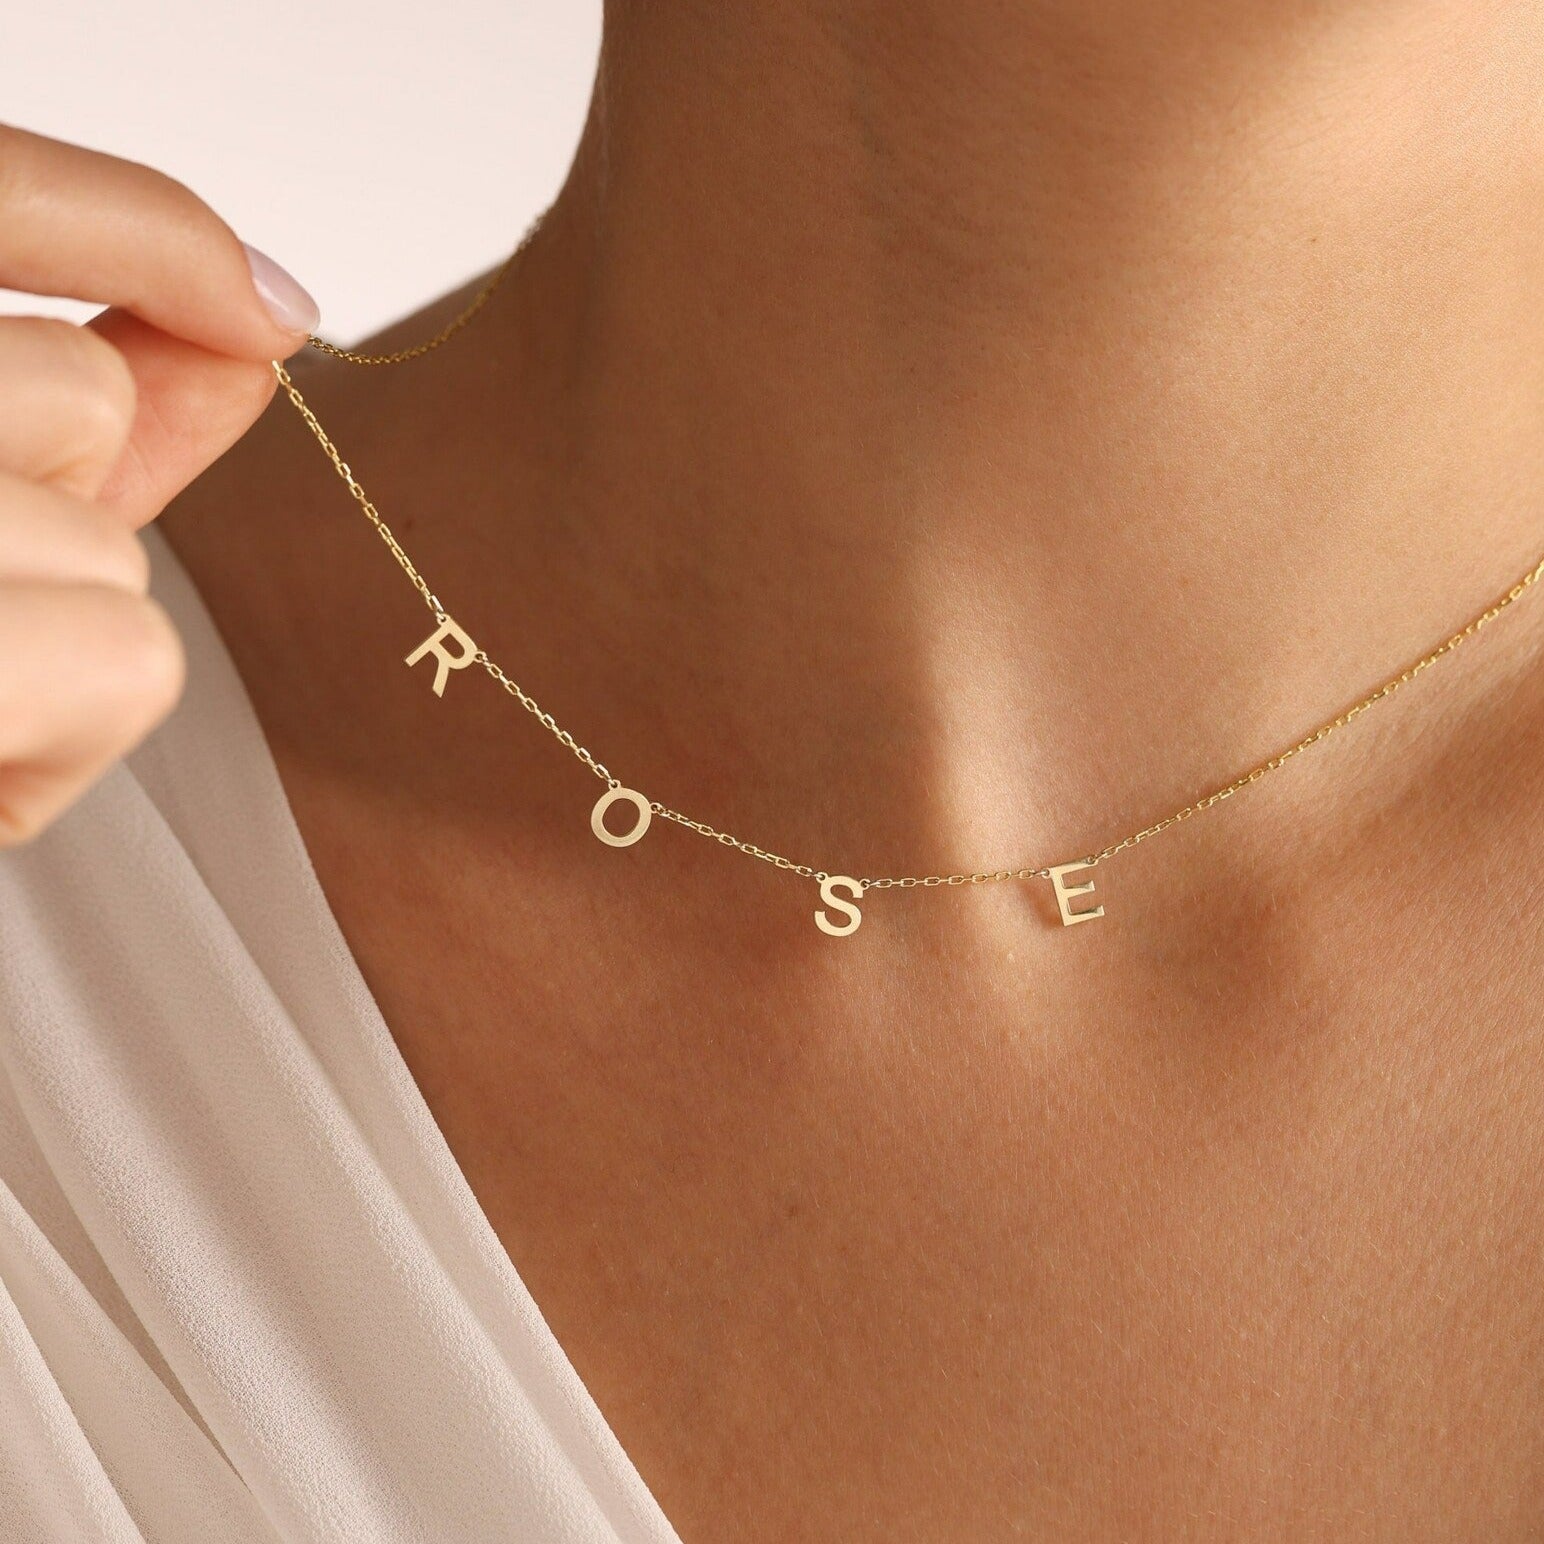 Gold Alphabet Letter Necklace Customized and handcrafted in the UAE.